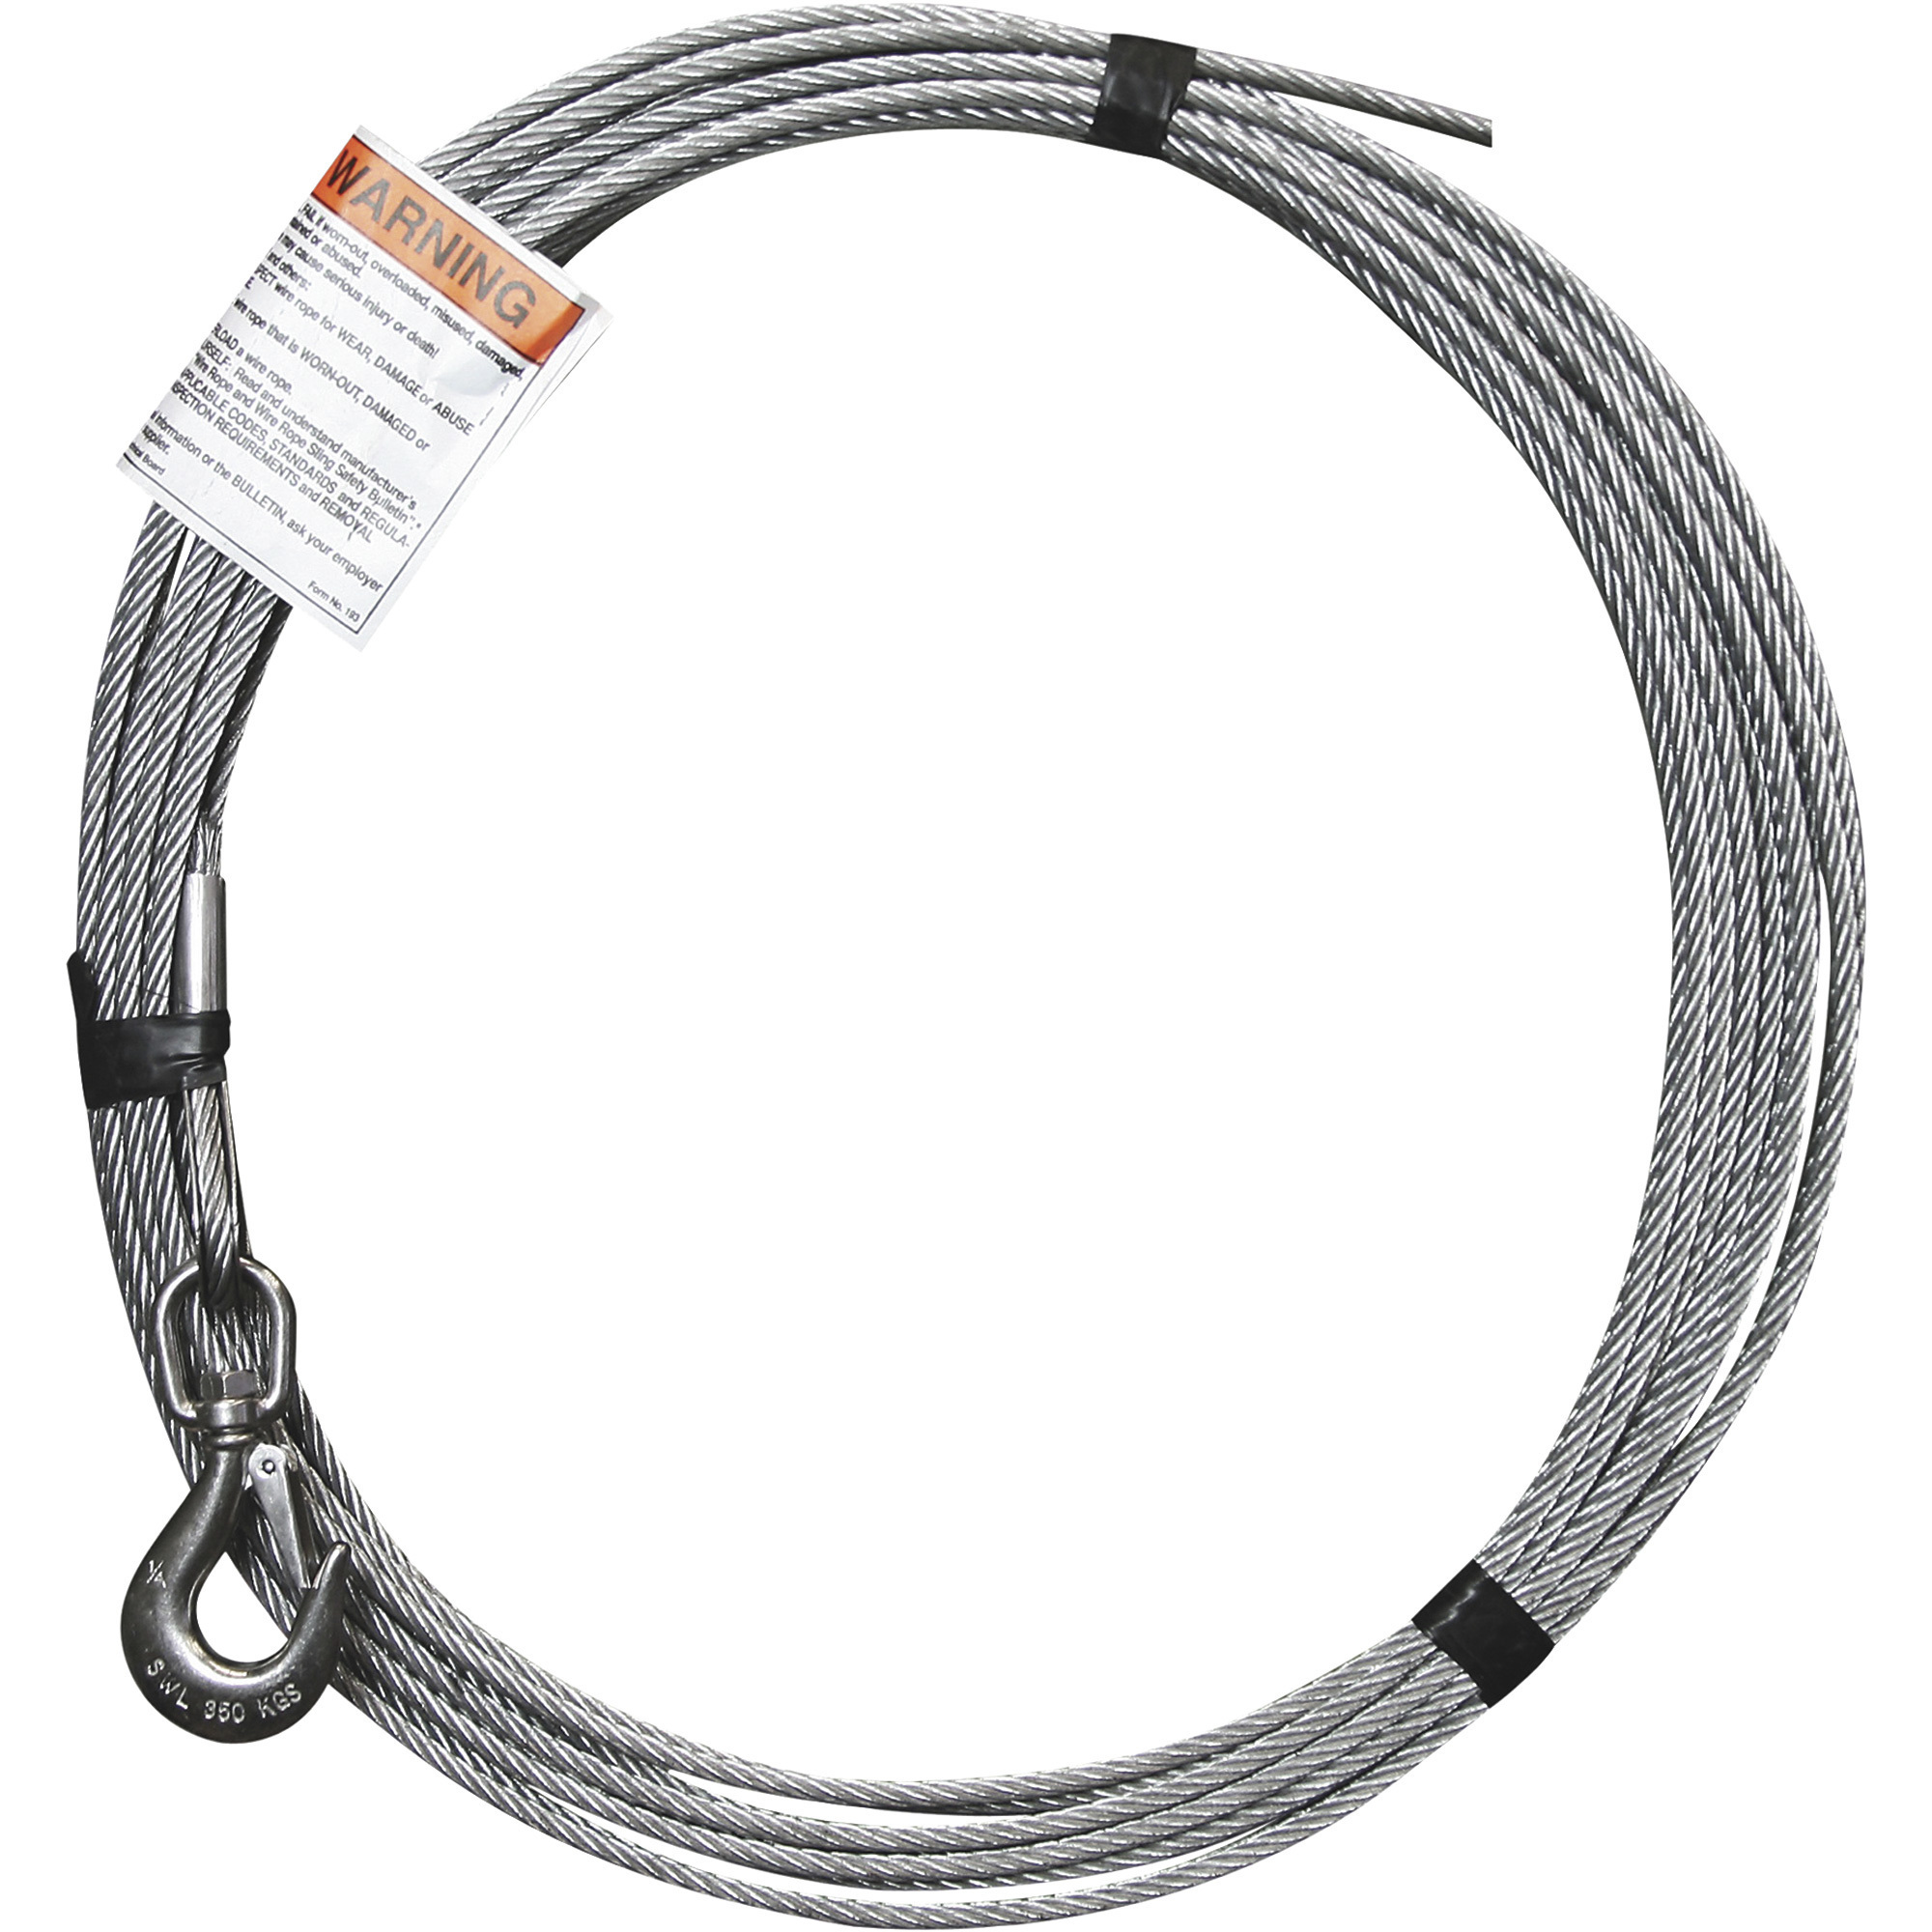 OZ Lifting Products Galvanized Wire Rope Assembly â 1/4Inch x 45ft.L, Model OZGAL.25-45